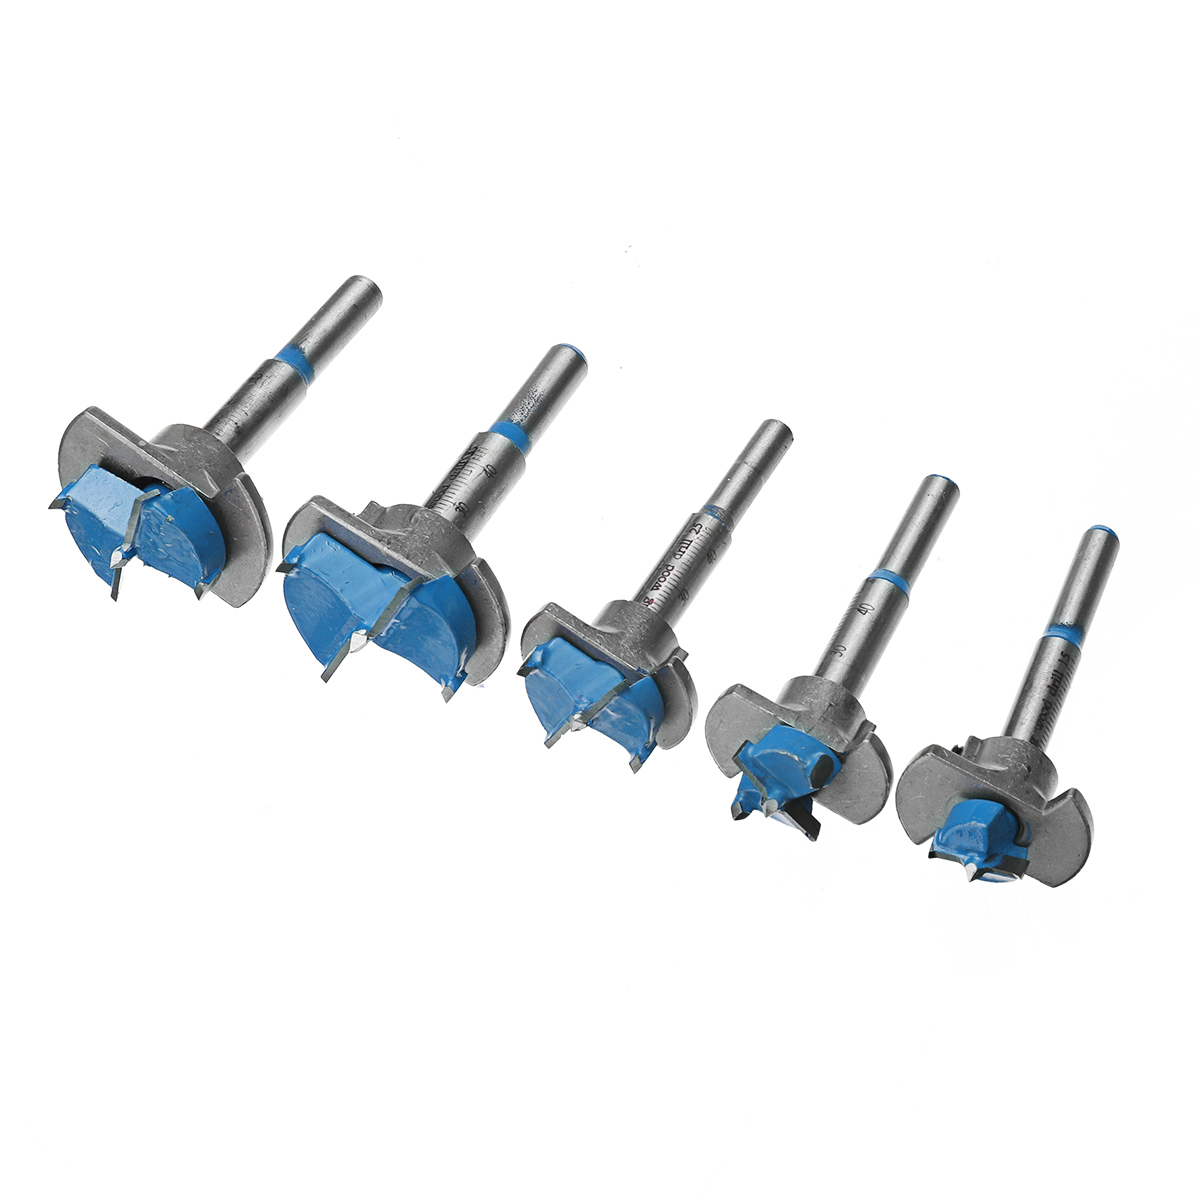 7pcs-Blue-or-Red-Woodworking-Hinge-Hole-Opener-Set-Positioning-Hole-Saw-Cutter-Drill-Bits-1615475-5